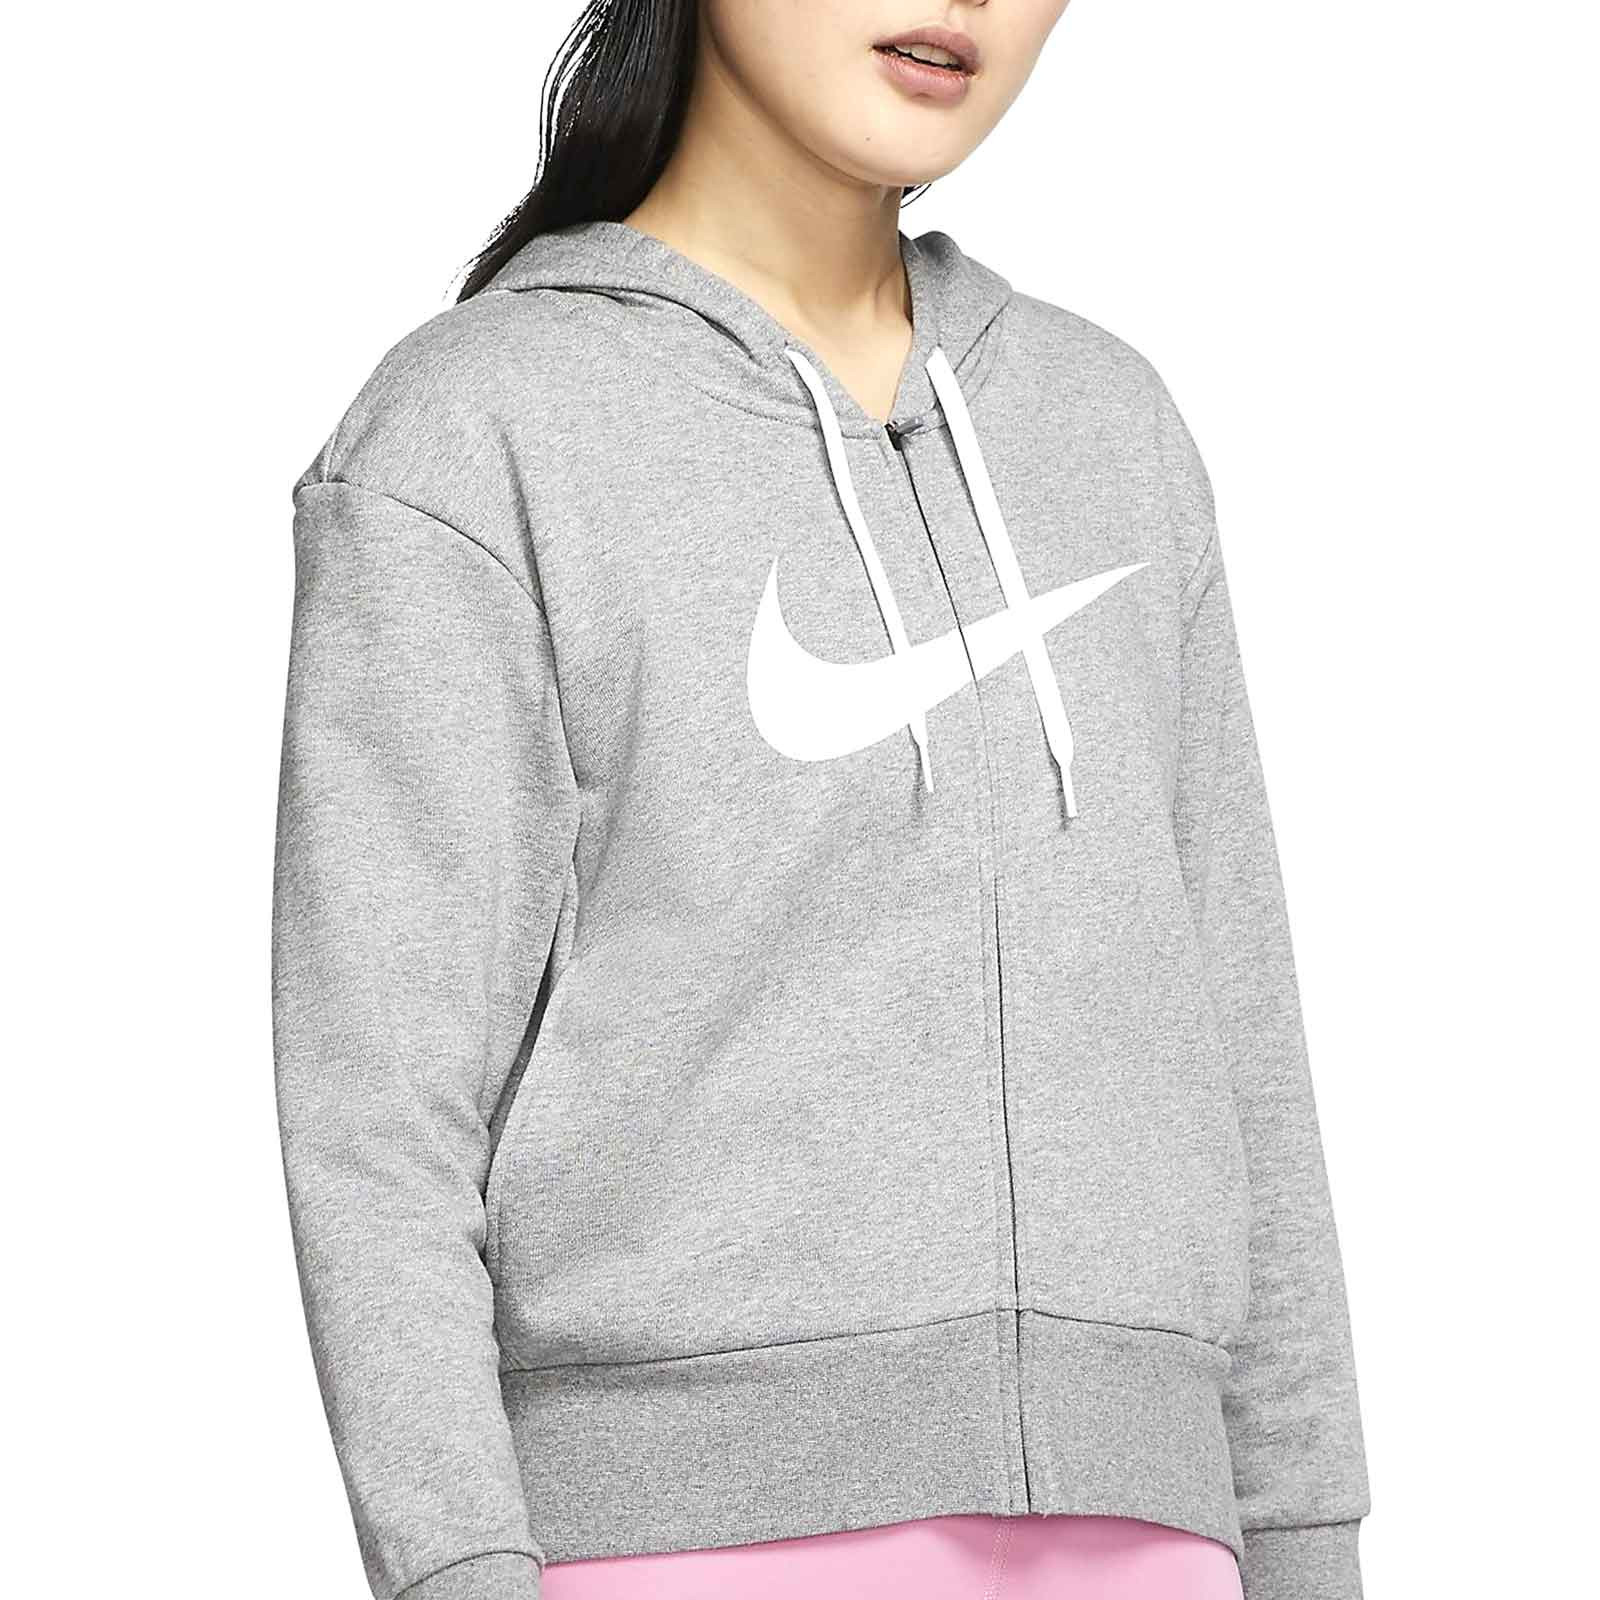 Chaqueta Nike Dry Get Fit mujer